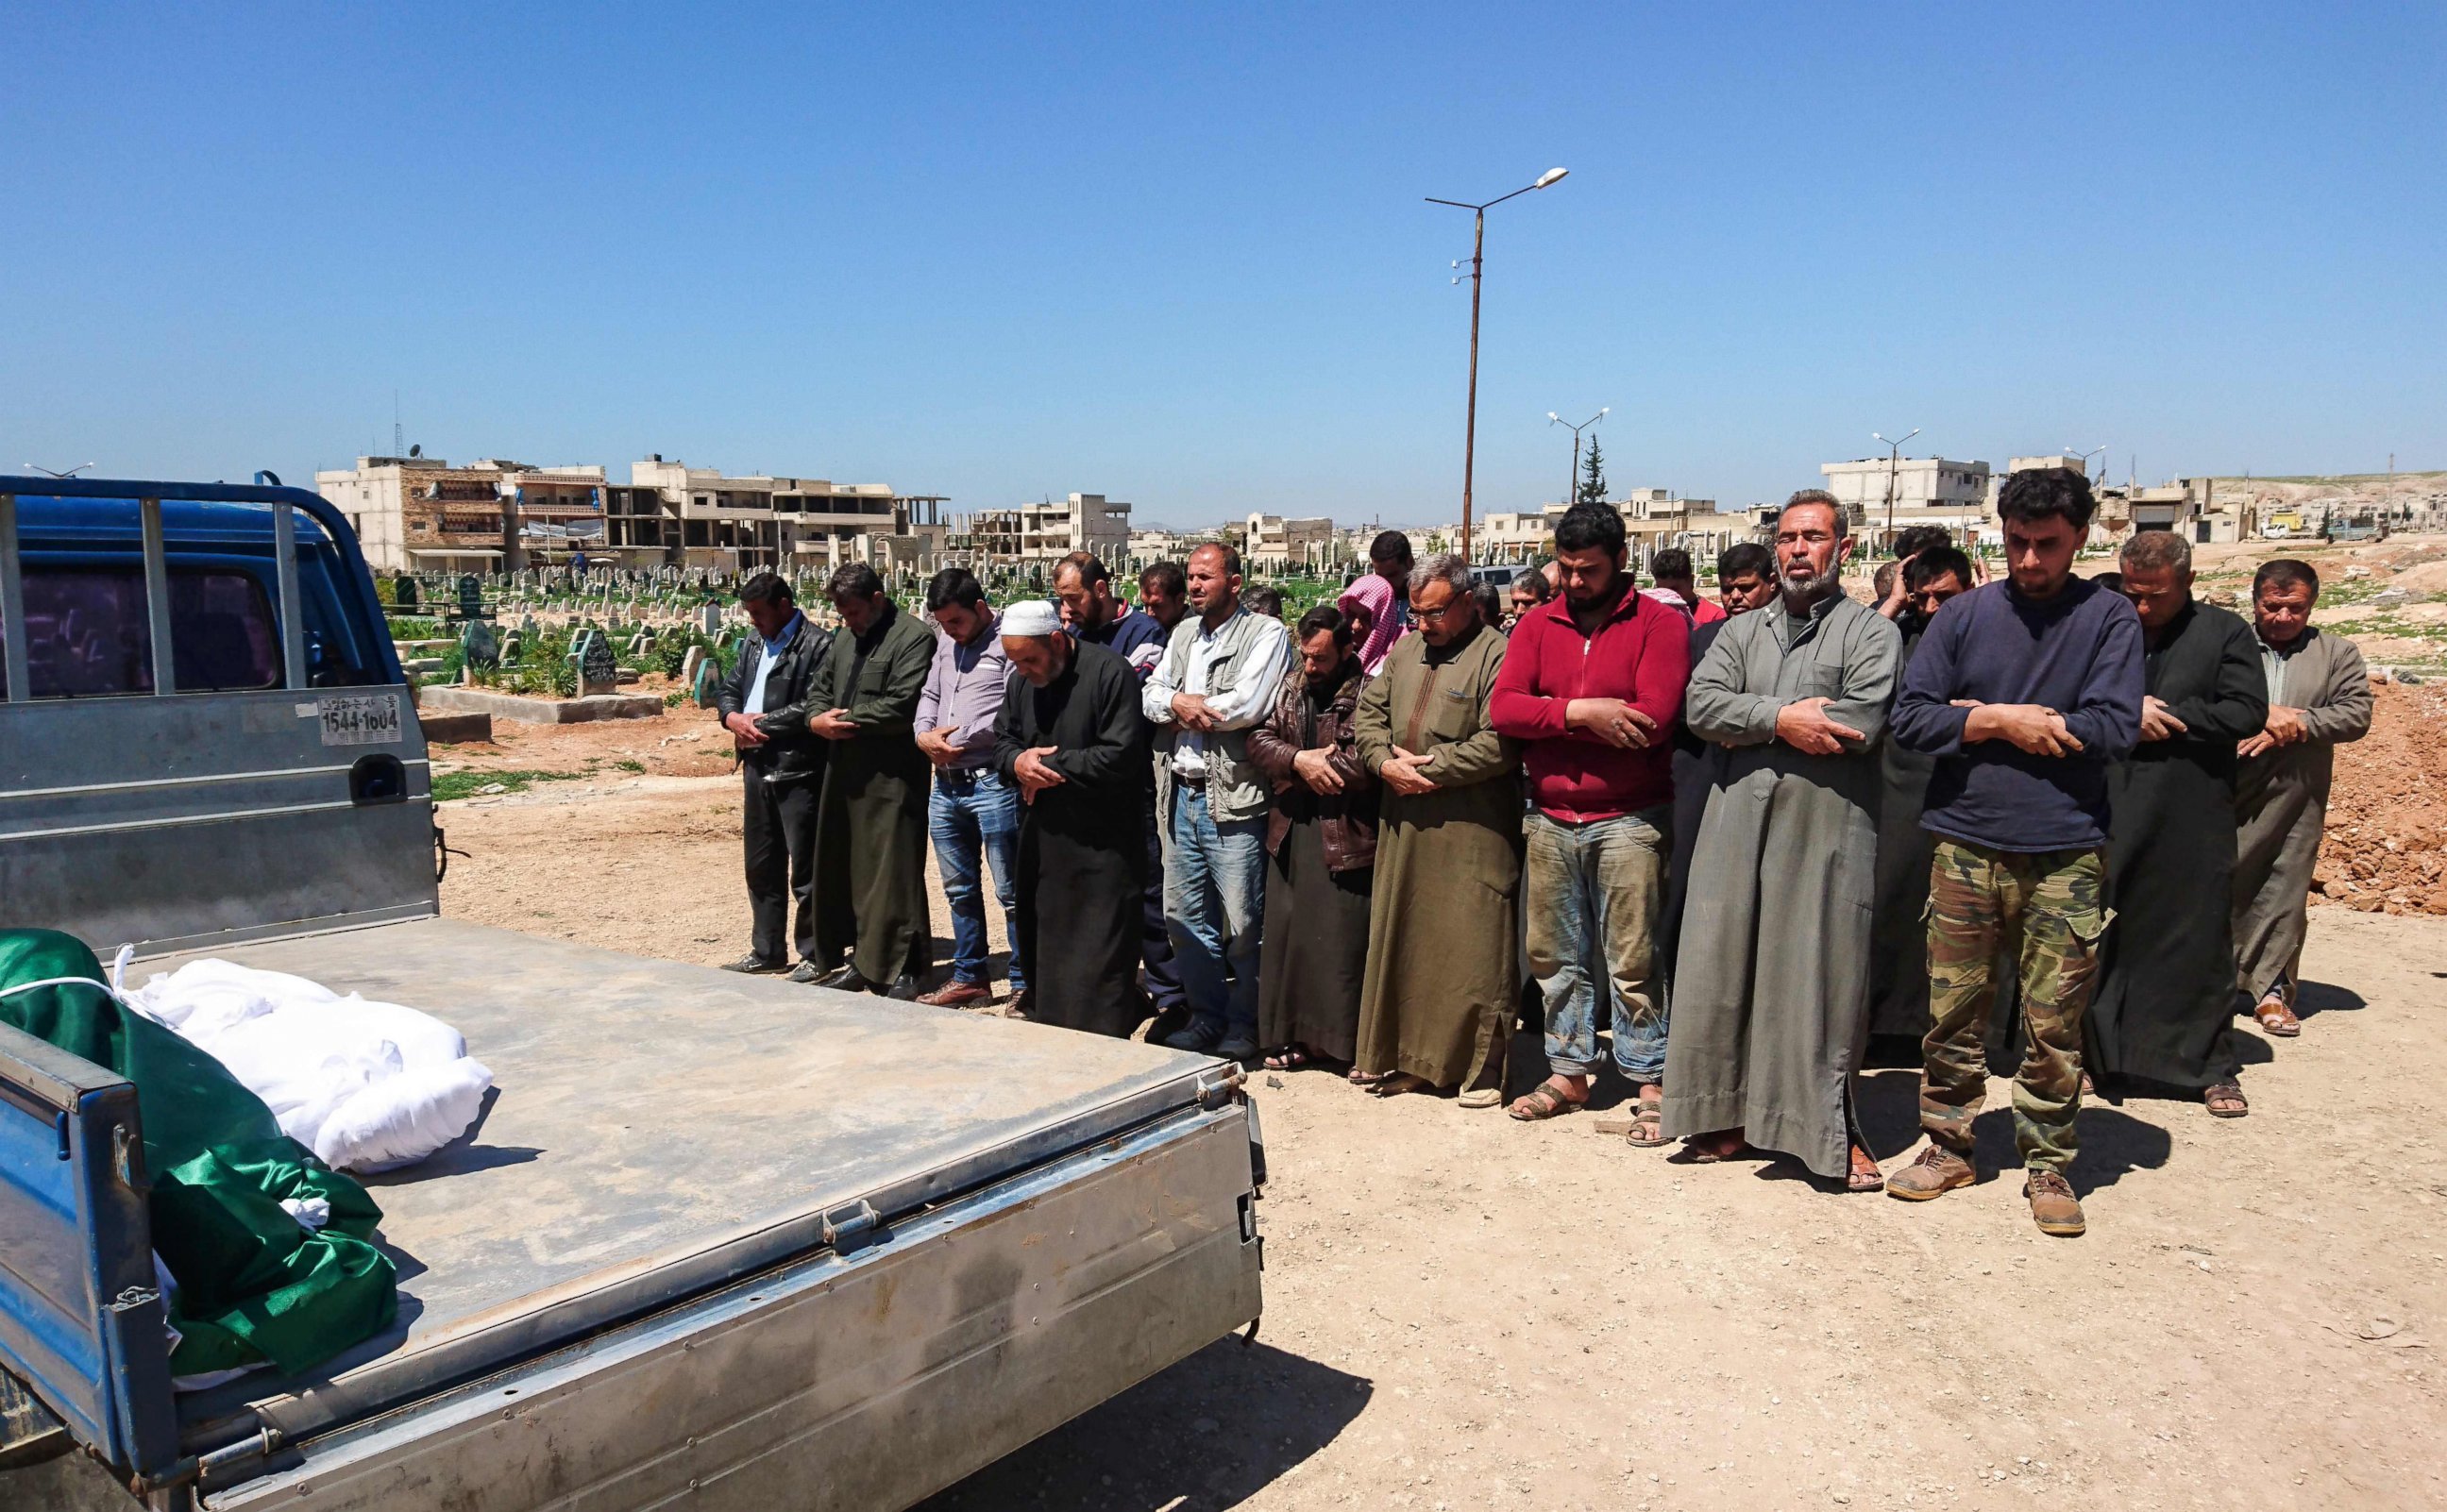 PHOTO: Syrians hold funeral prayers before they bury the bodies of victims of a a suspected toxic gas attack in Khan Sheikhun, a rebel-held town in Syria's Idlib province, April 5, 2017.